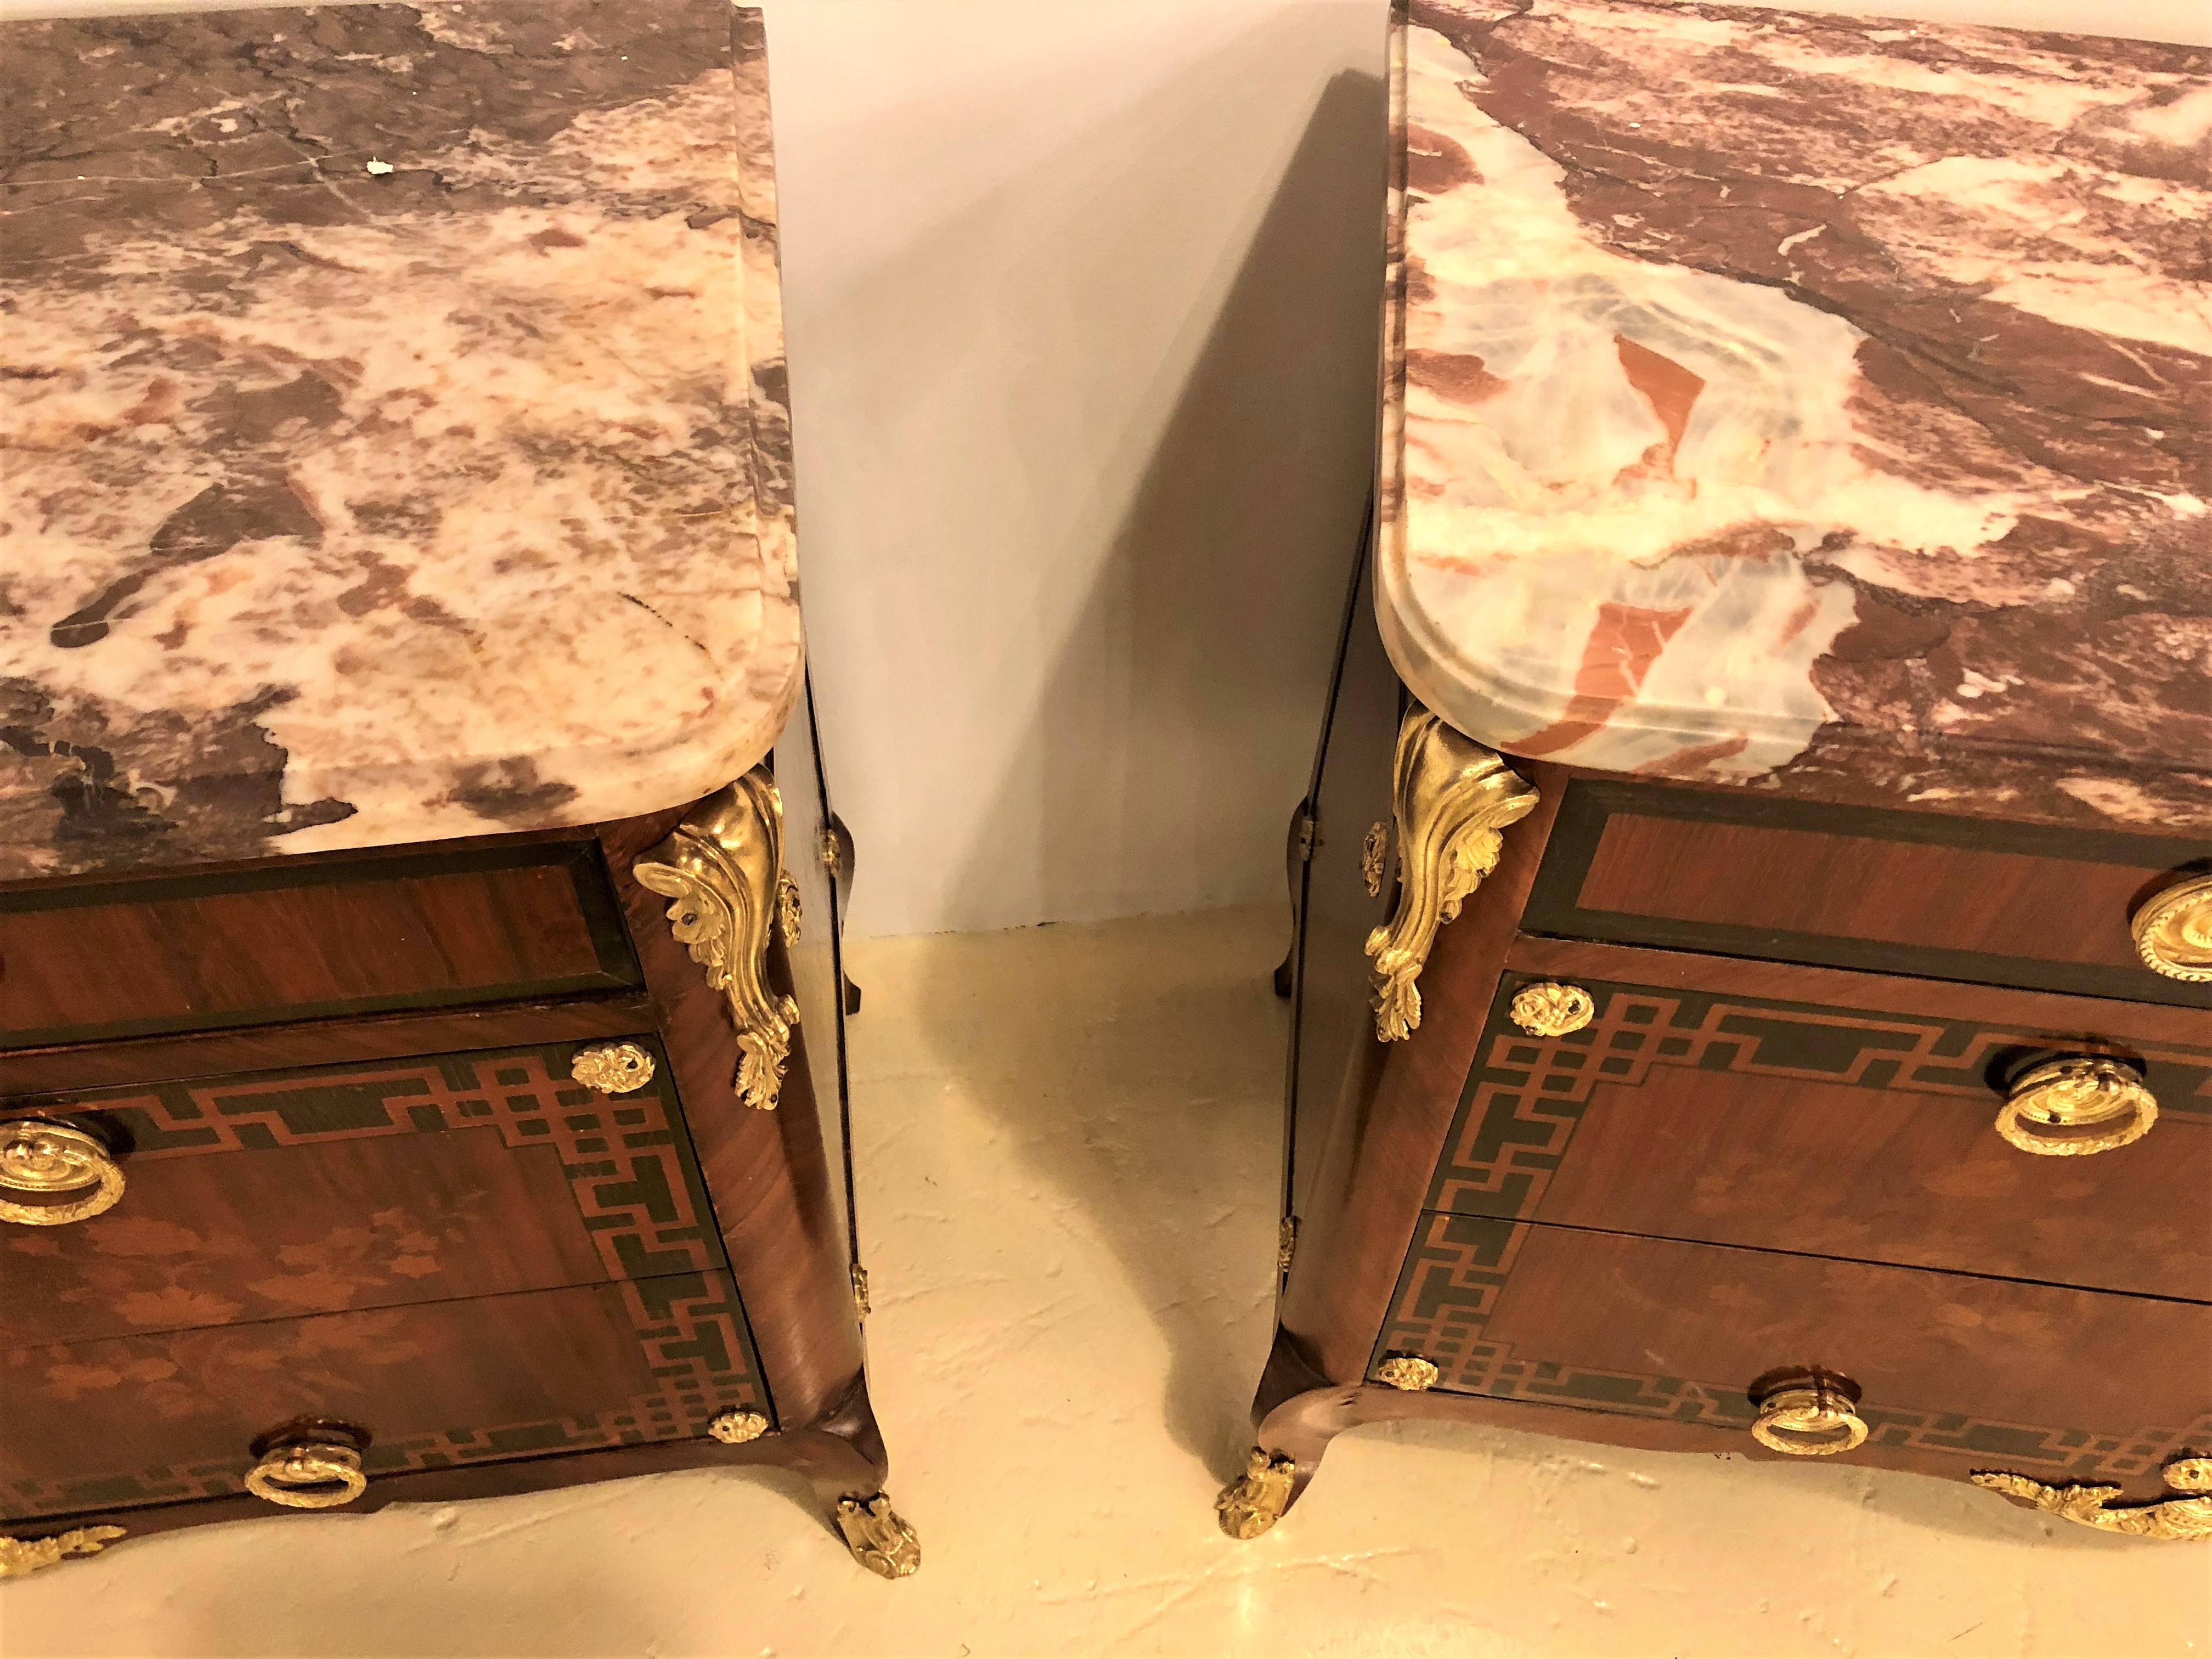 A fine pair of Louis XV style antique French floral inlaid marble-top commode or chests. The fine French marble tops of rouge and beige form supported by a group of three drawers all with ebony as well as floral inlays. The whole having bronze gilt